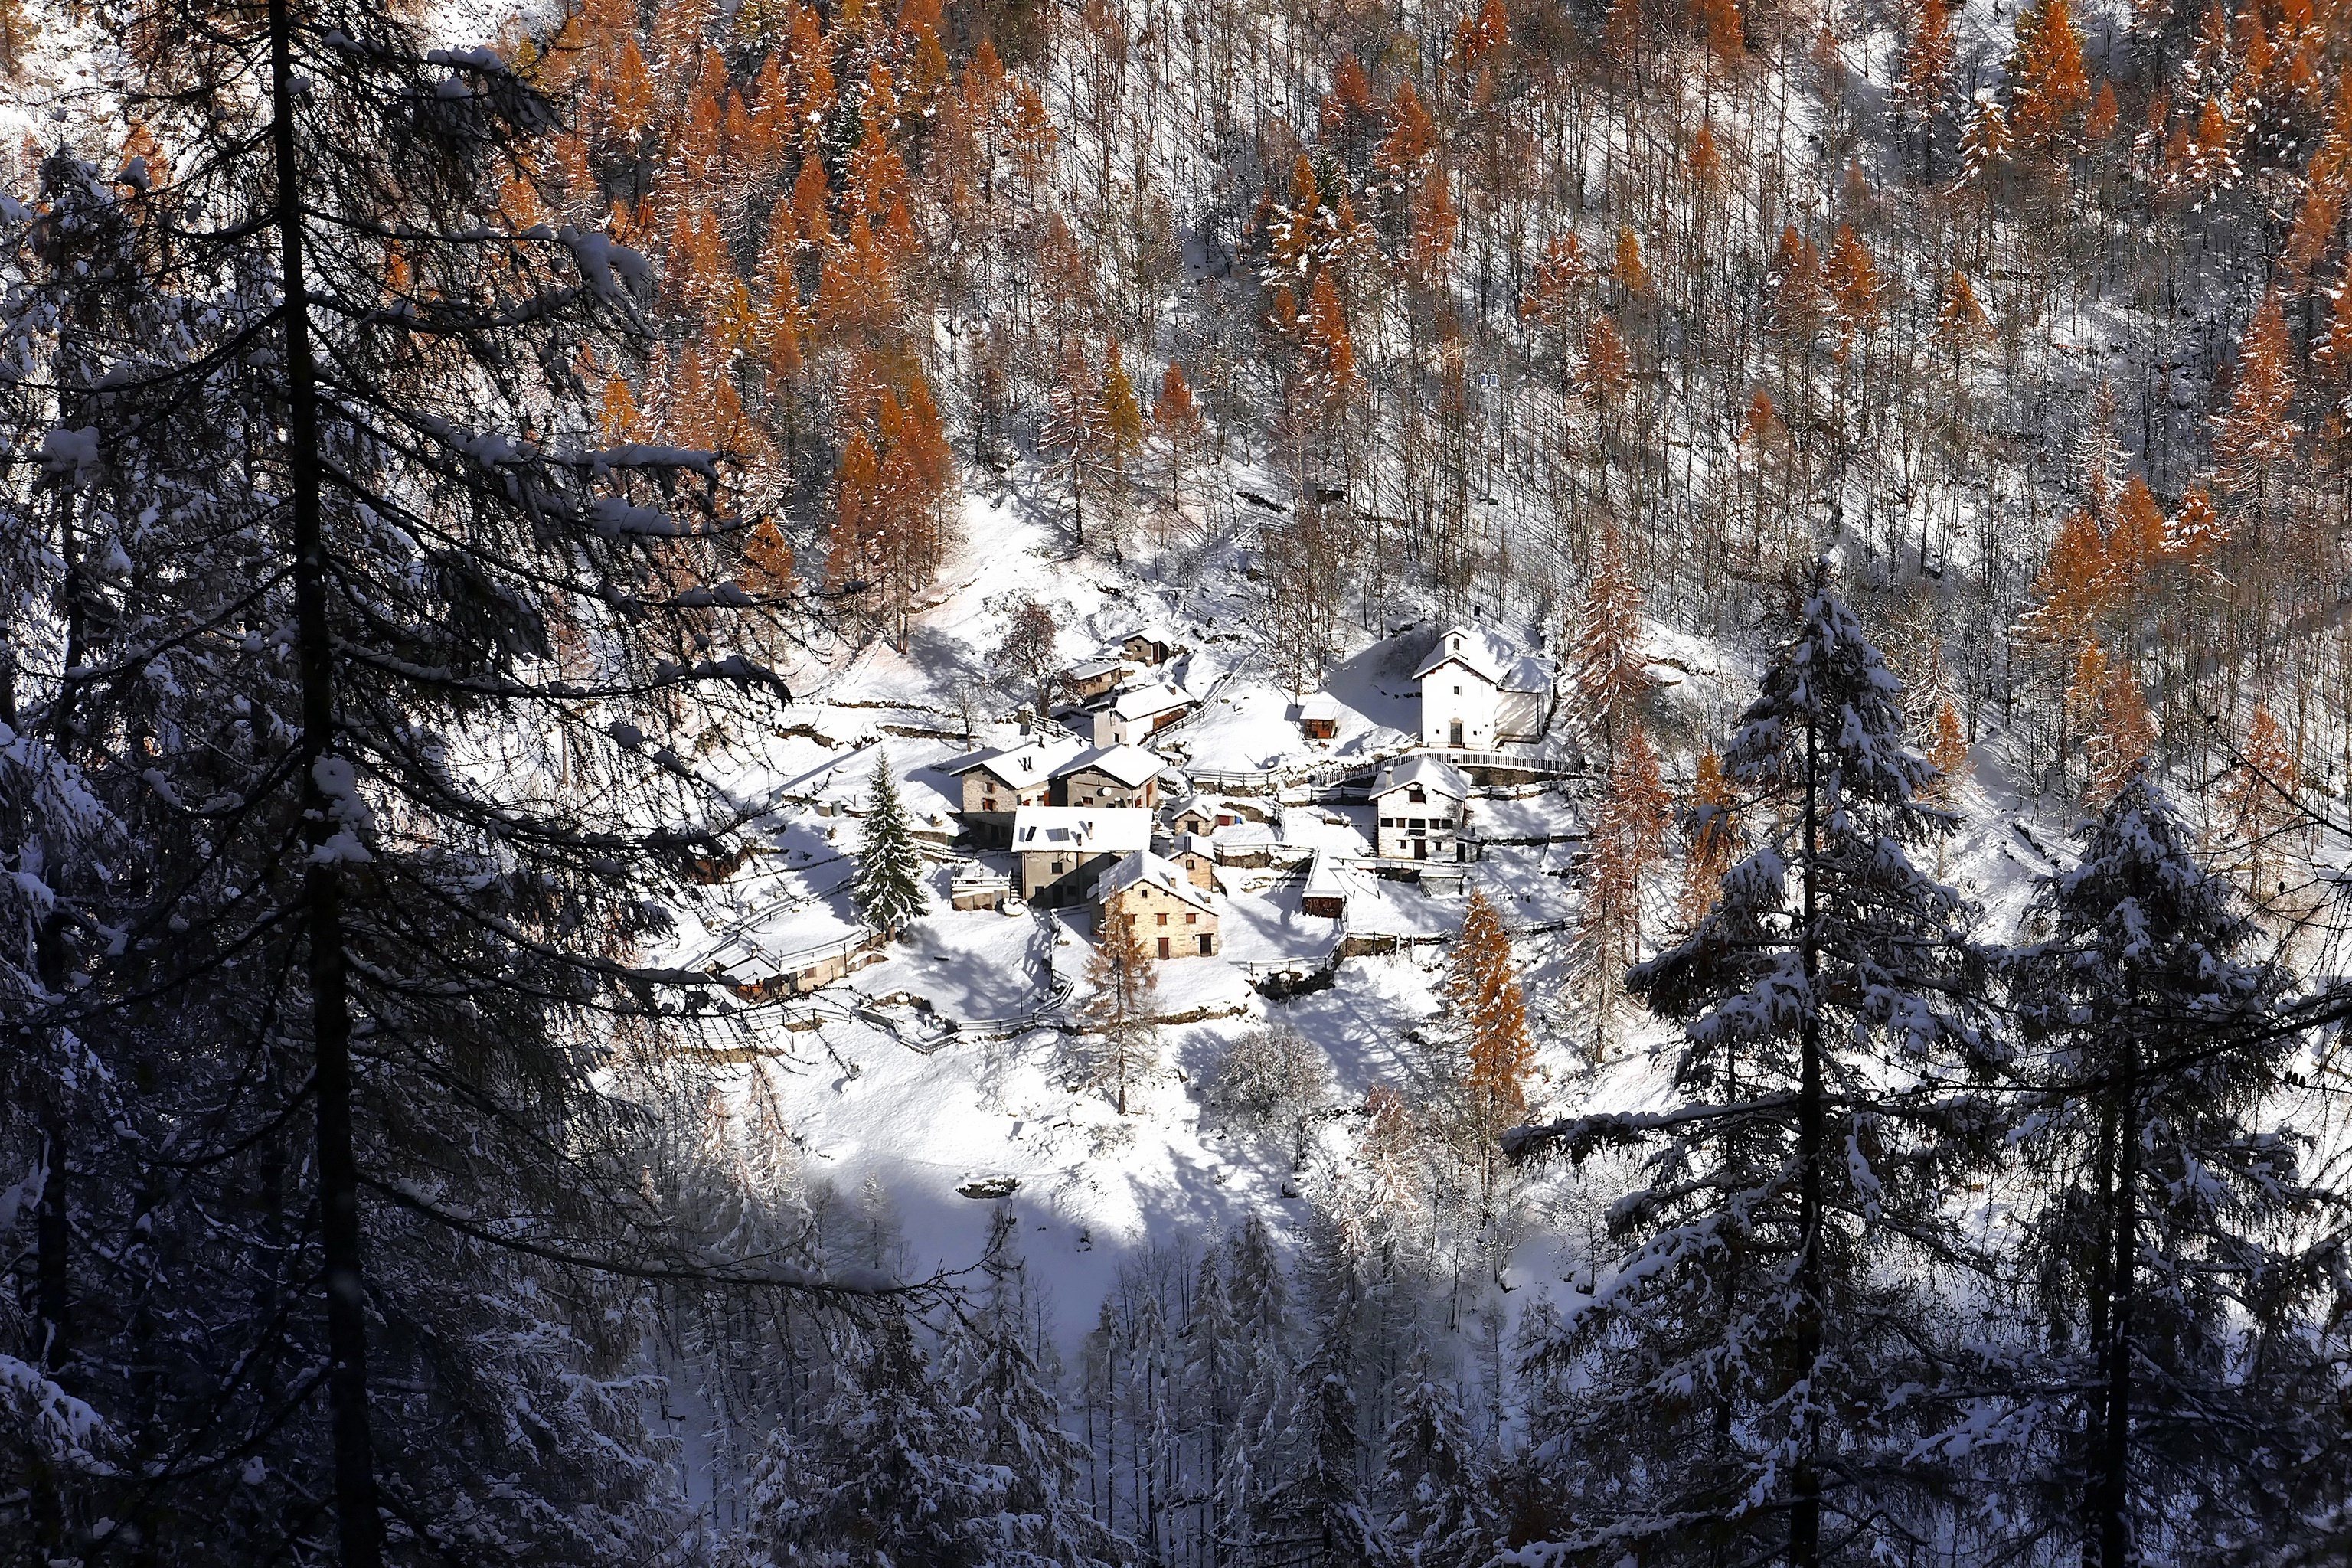 man made, village, forest, italy, lombardy, winter